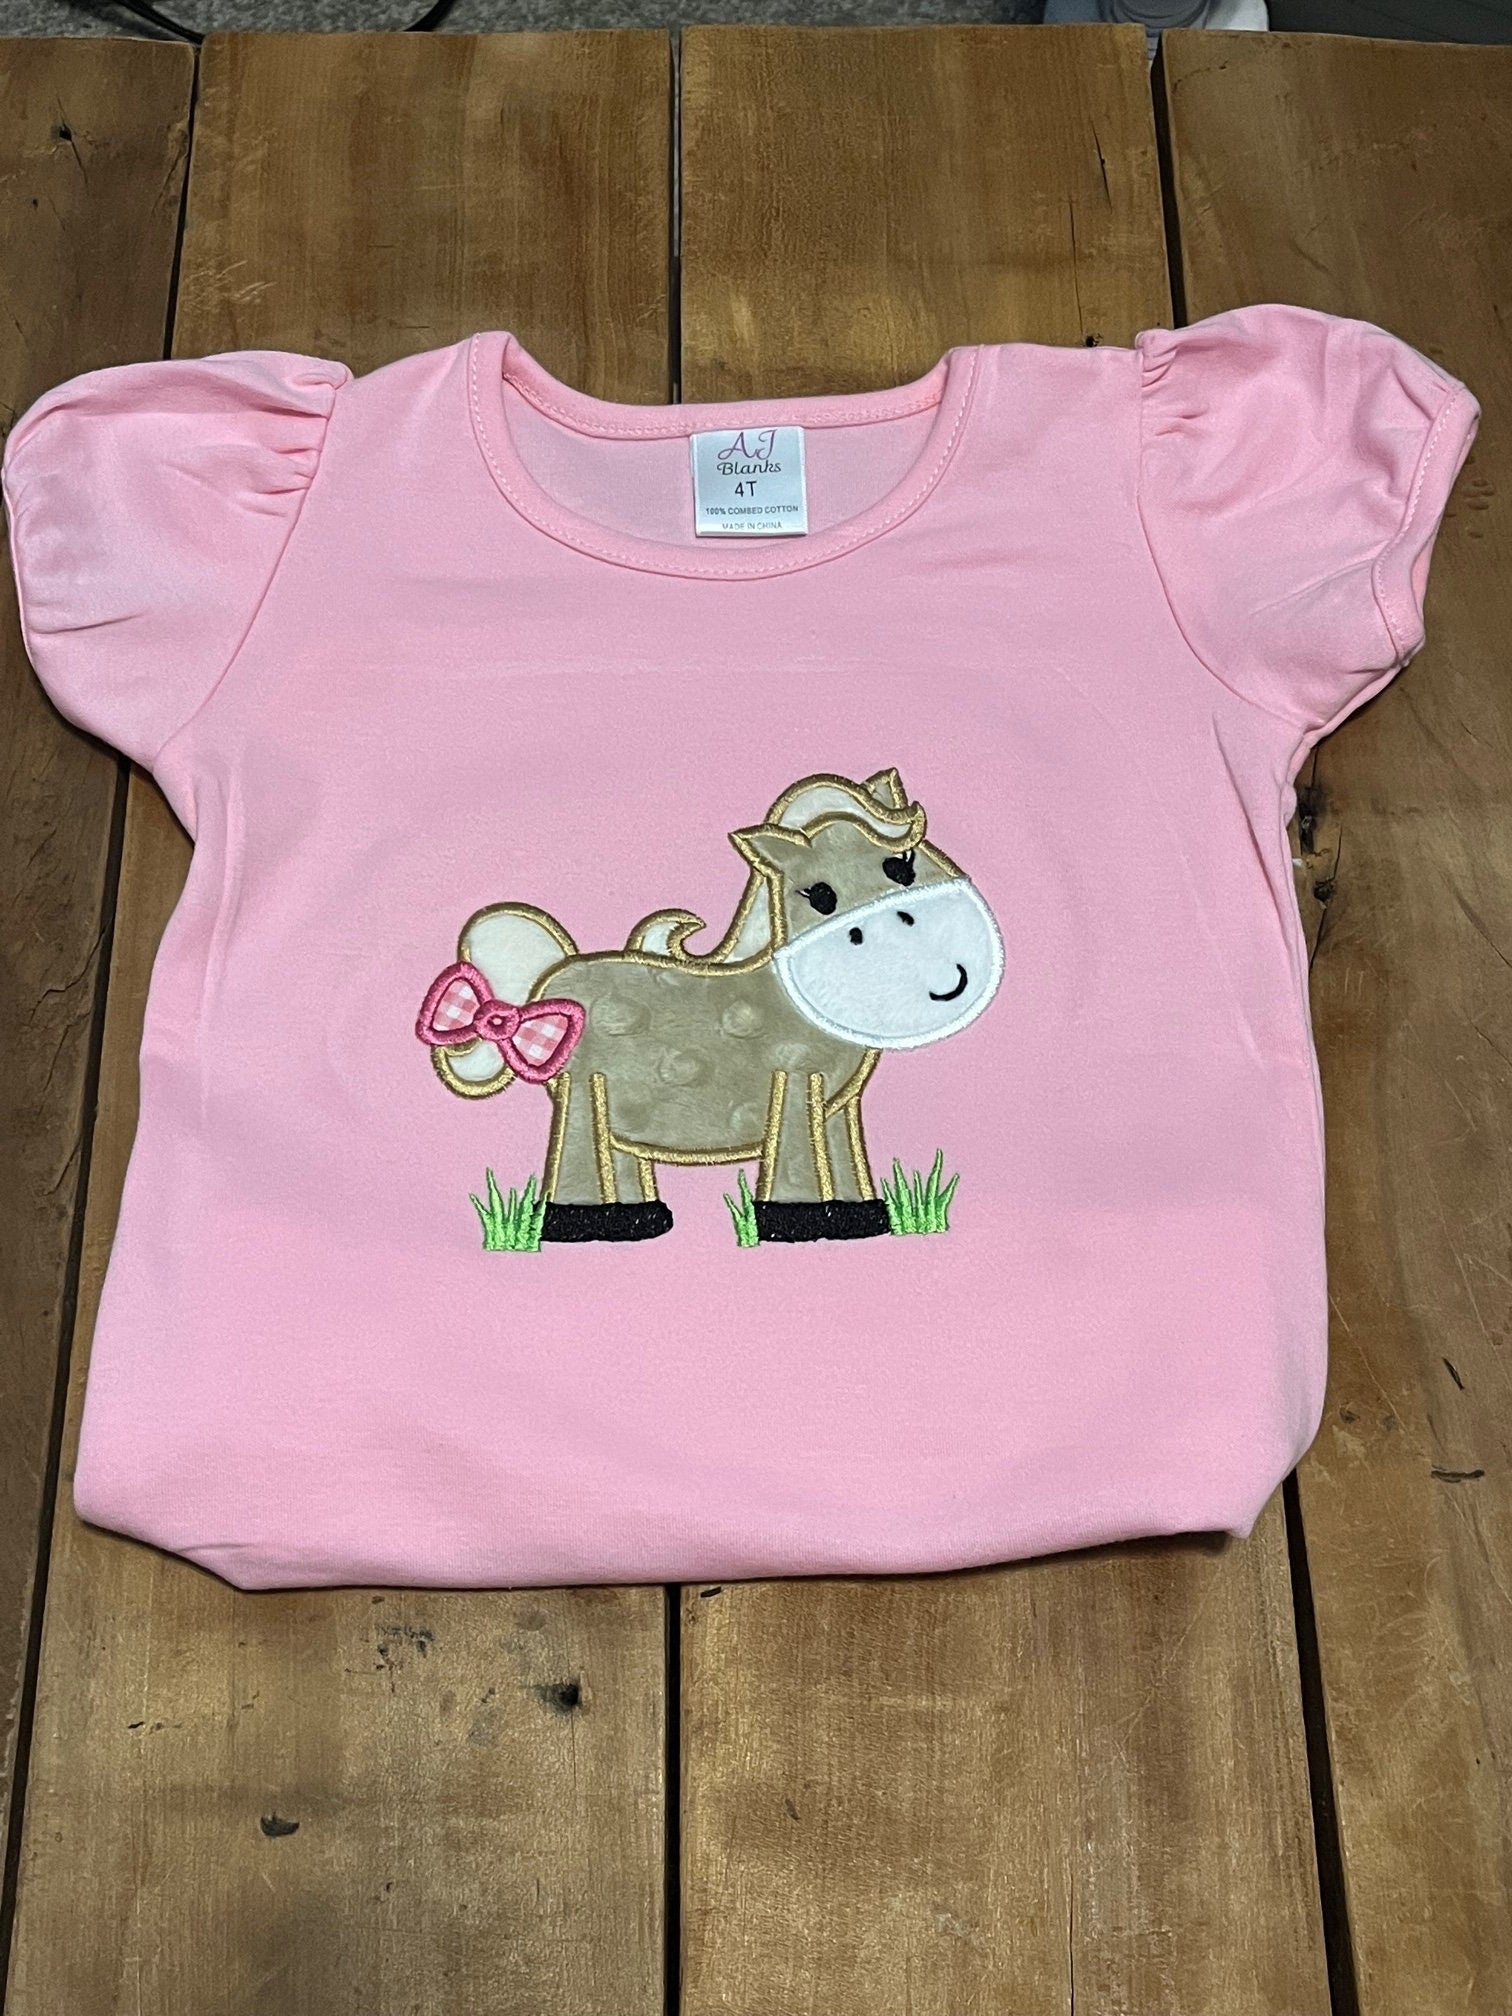 Embroidered horse shirt, shown in pink. Available in white and pink. Other colors available on request